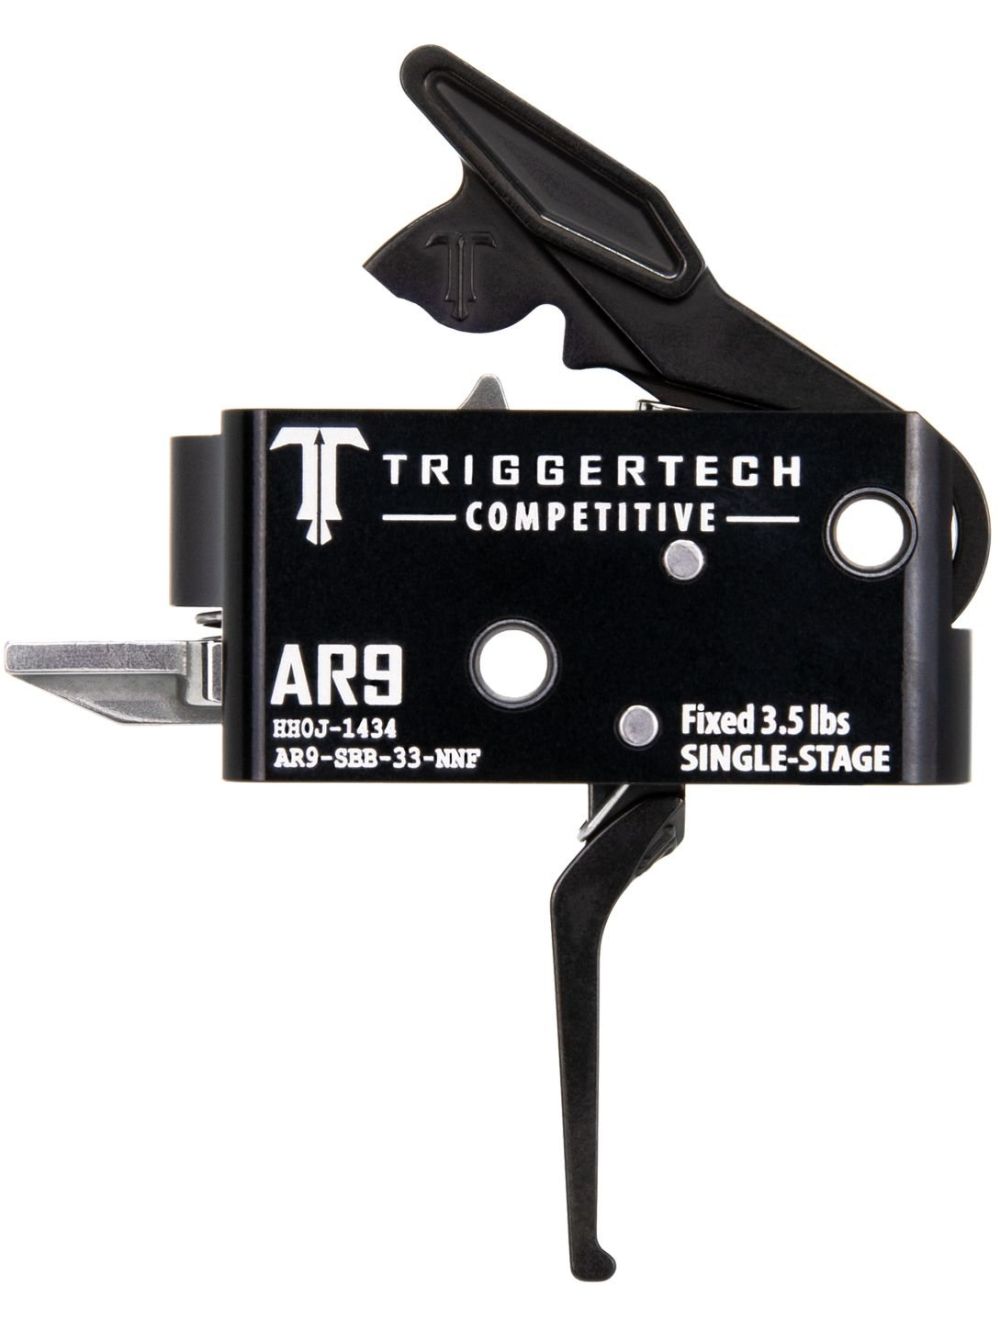 AR9 Single-Stage Competition Trigger